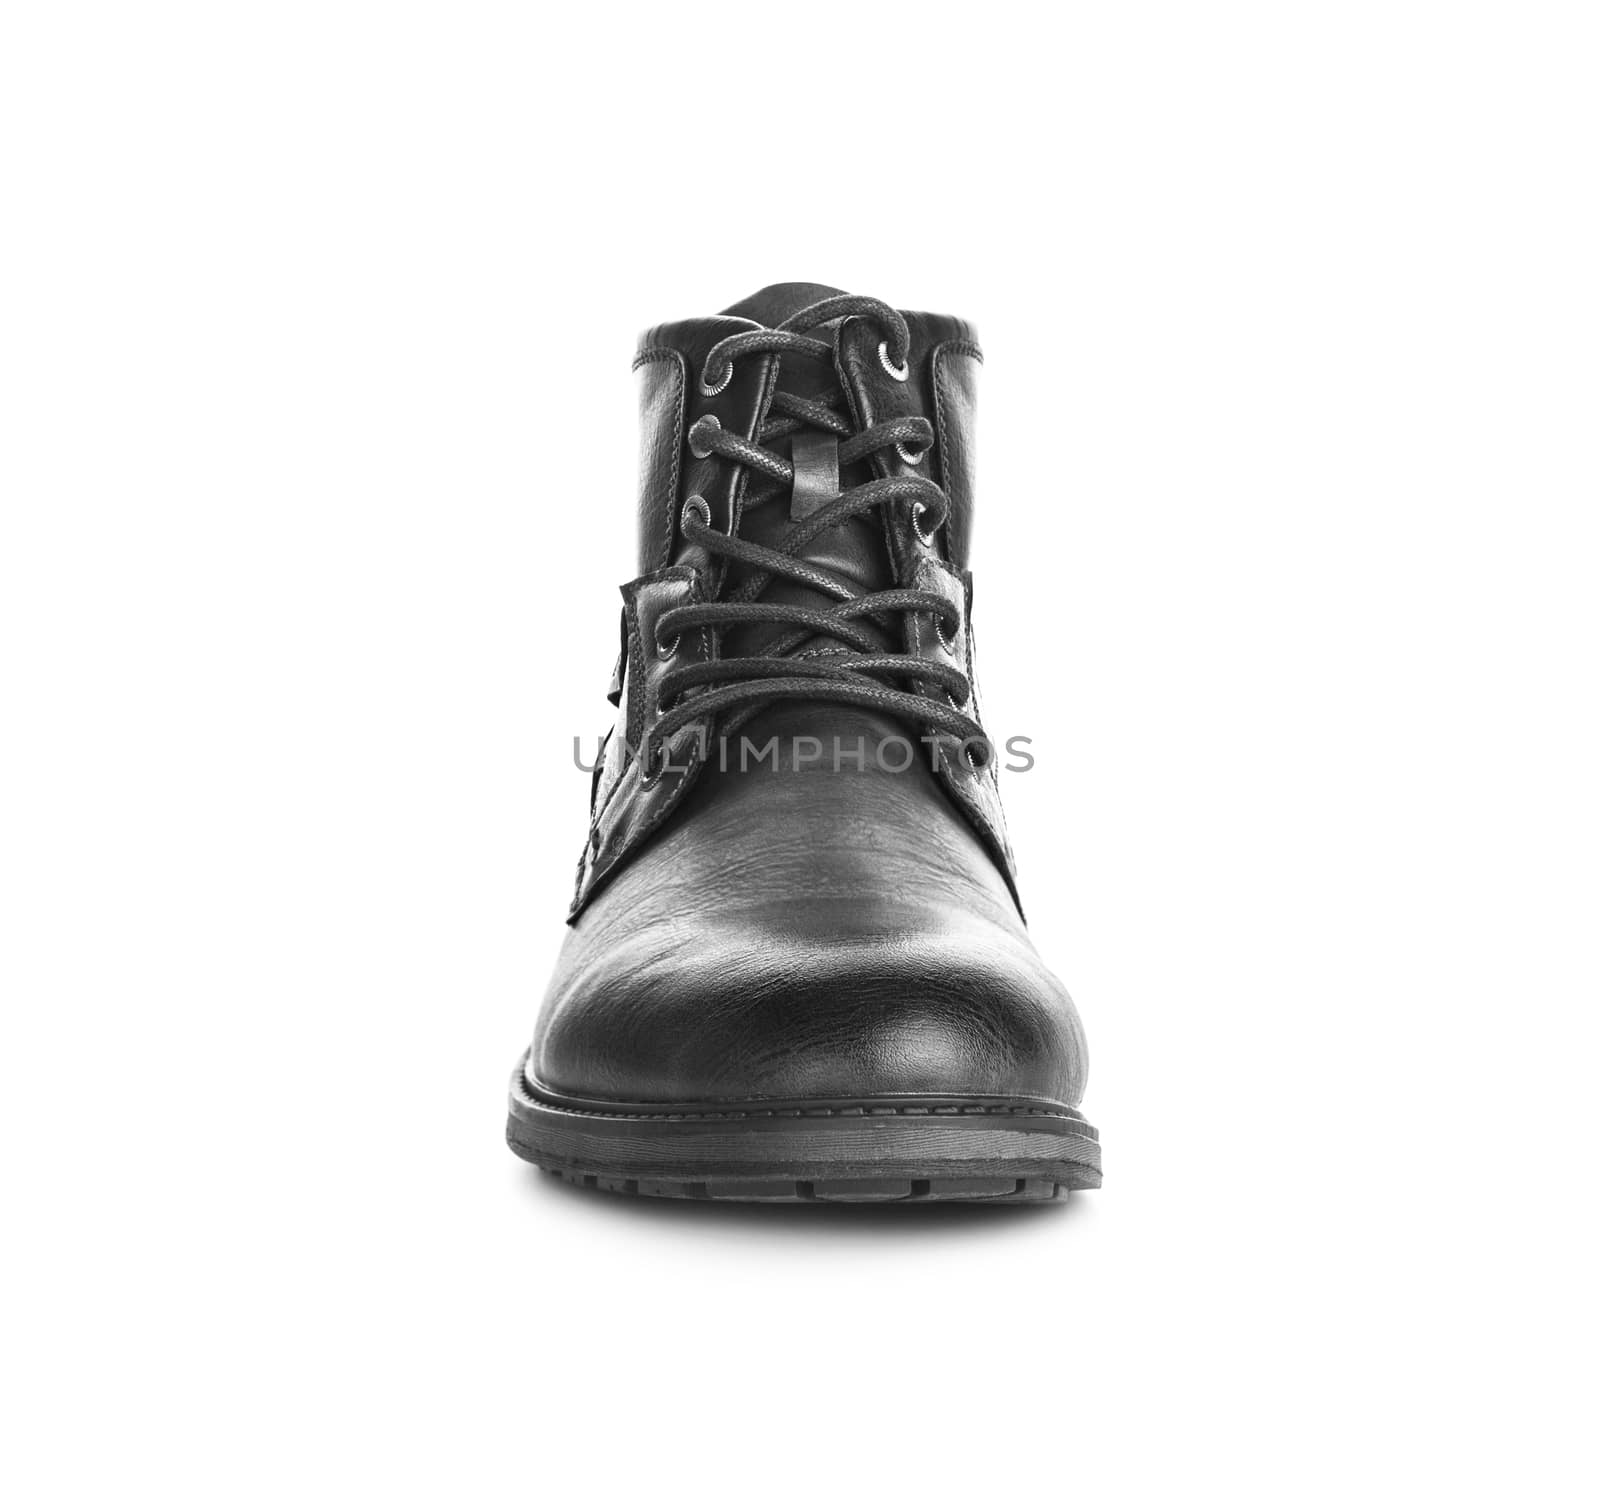 Men's shoes black color casual. Isolated on white background